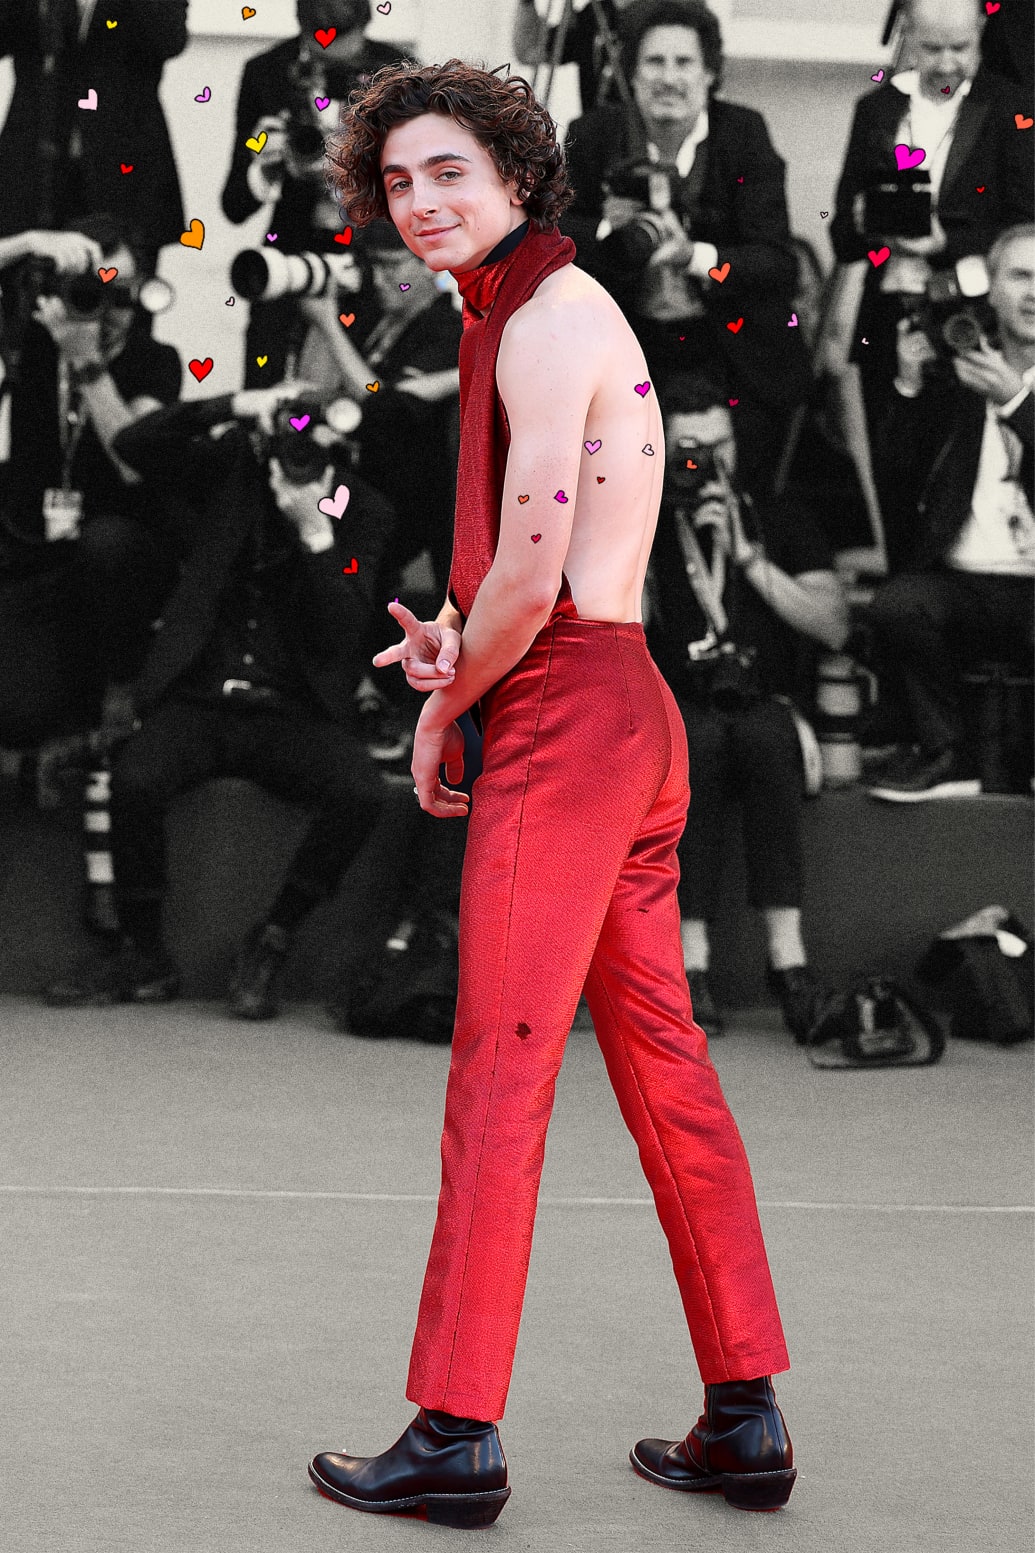 Image: Timothee Chalamet in a red backless outfit